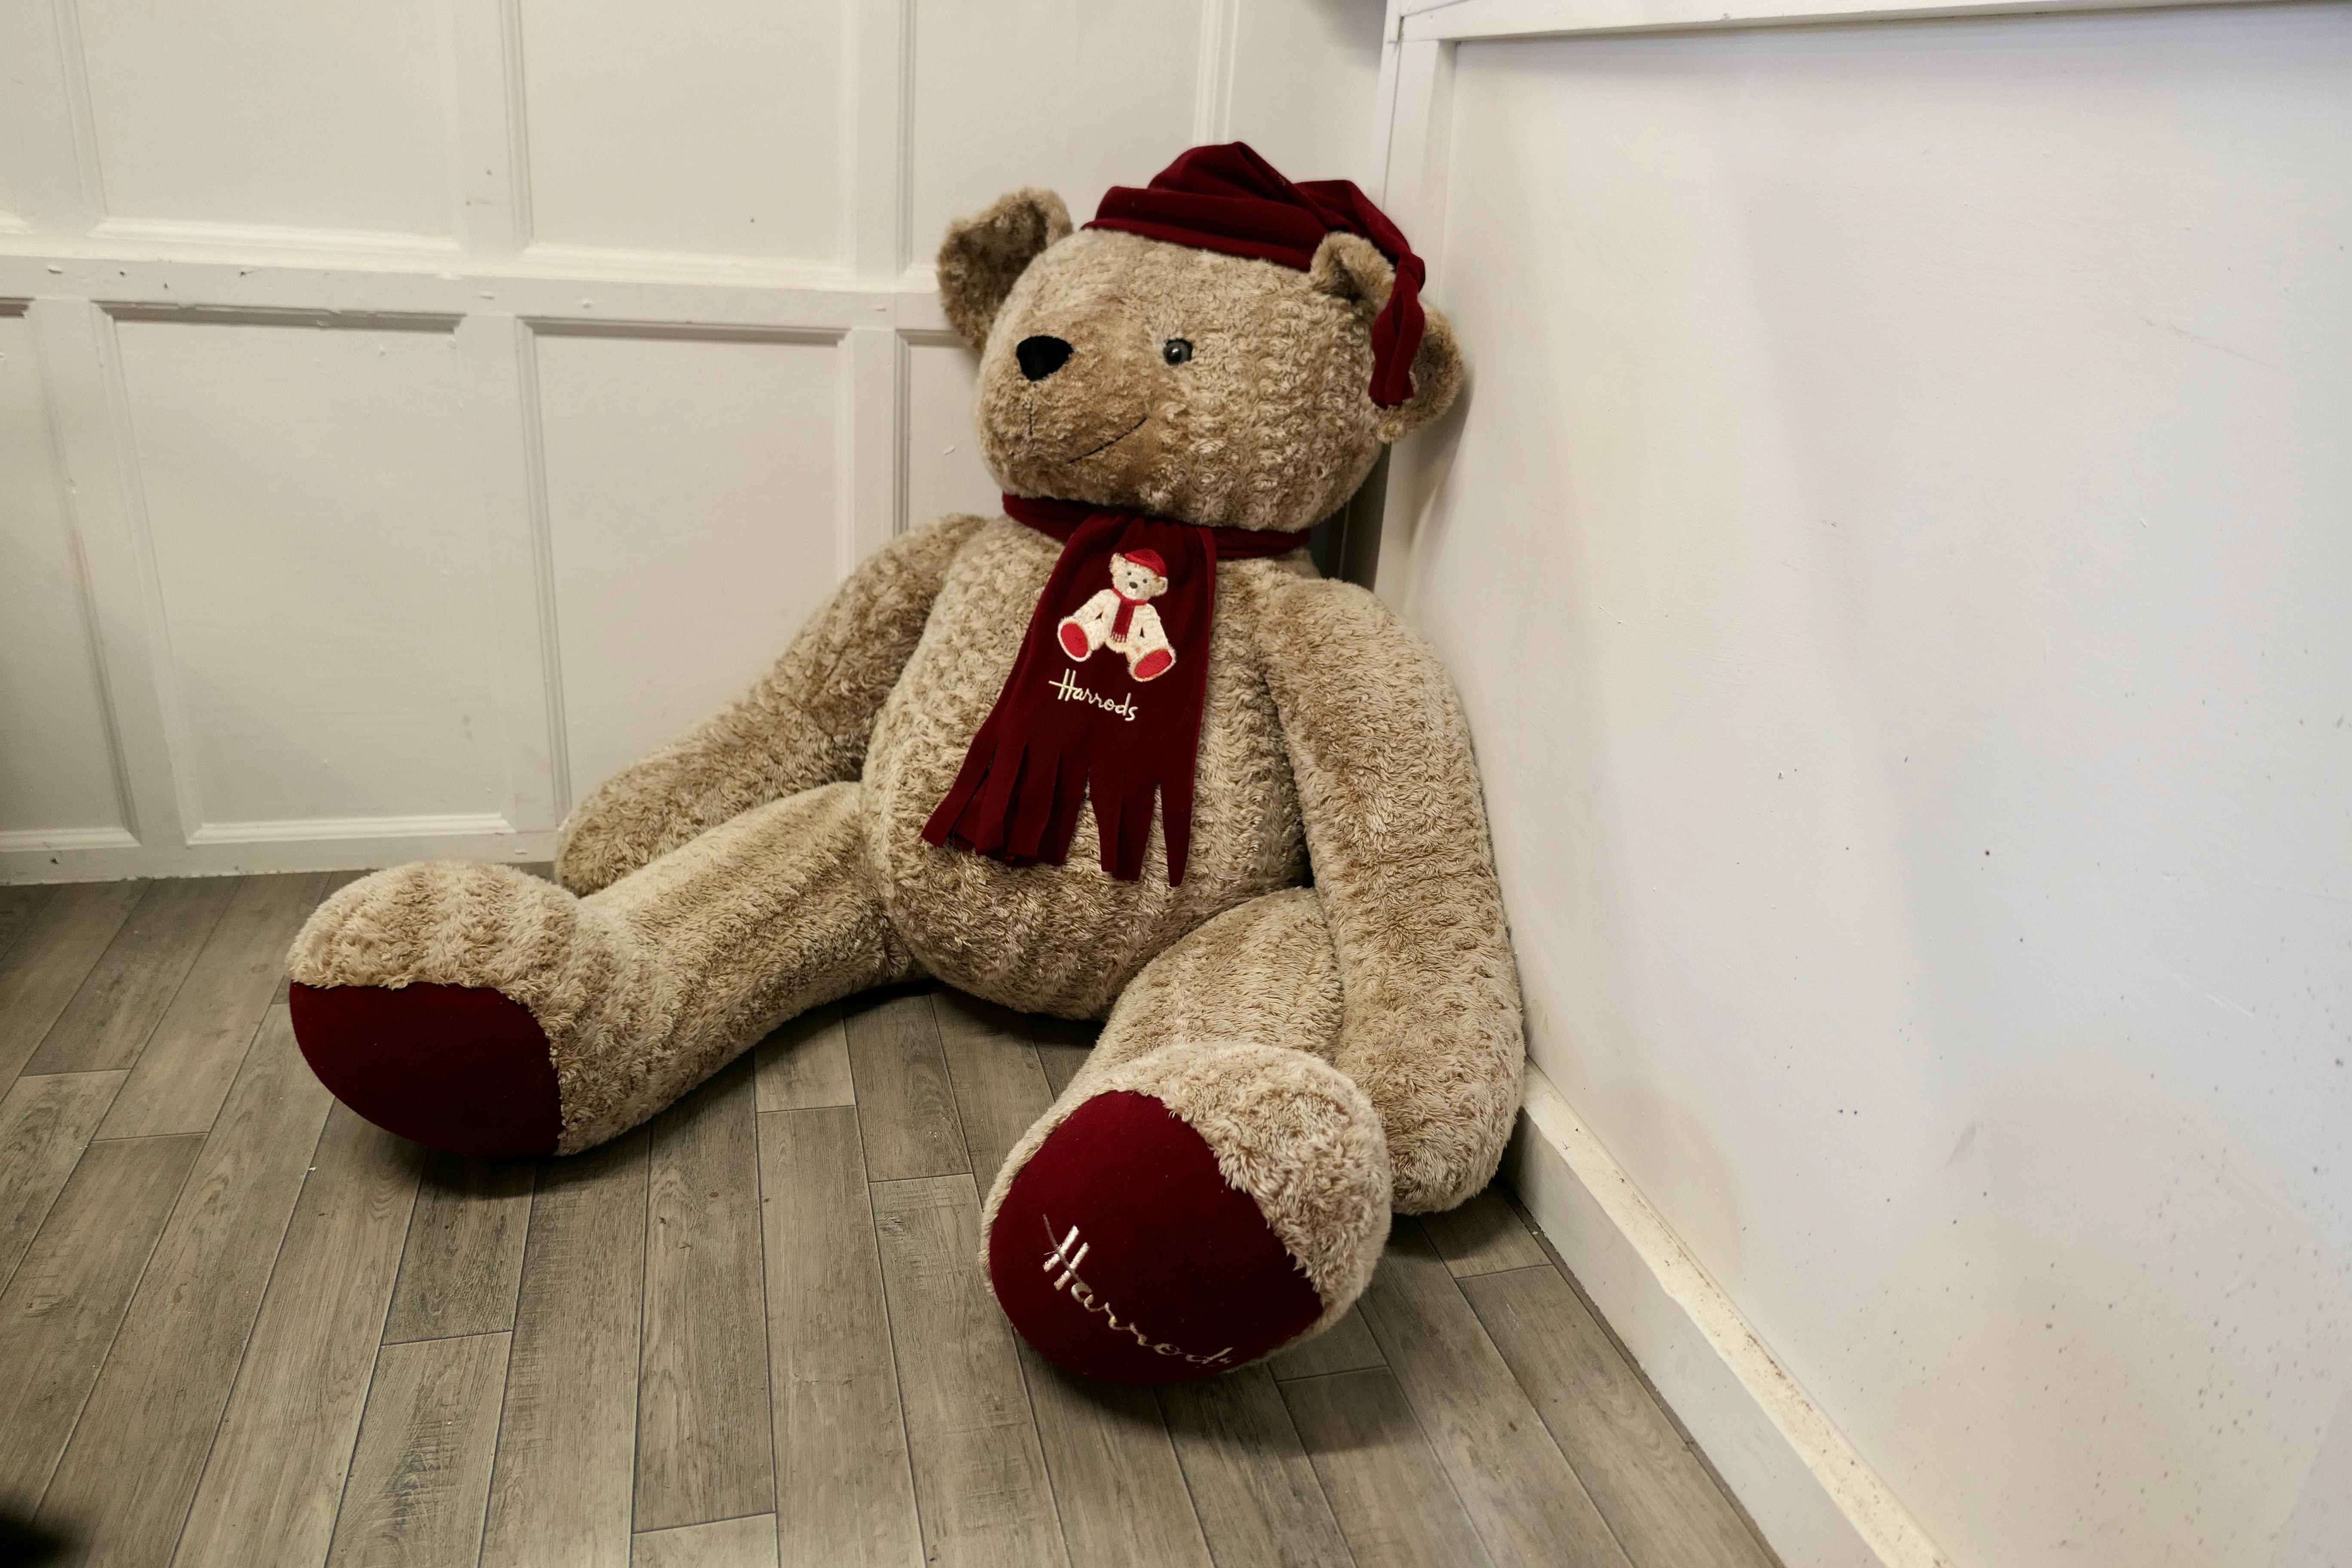 Contemporary  Tall Giant Harrods Shop Display Teddy Bear This Is a Very Rare Piece For Sale